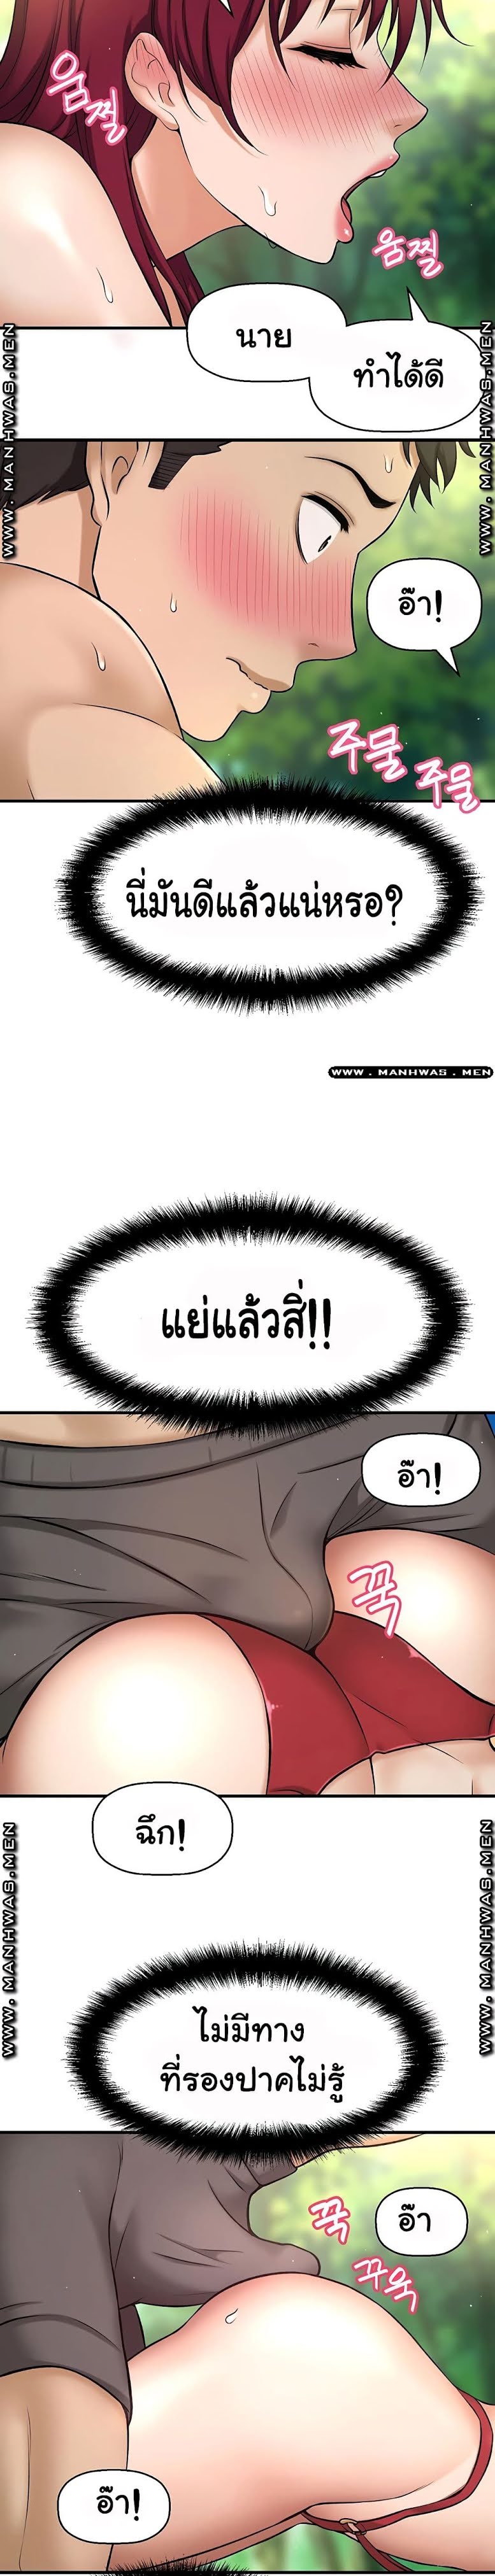 I Want to Know Her - หน้า 47